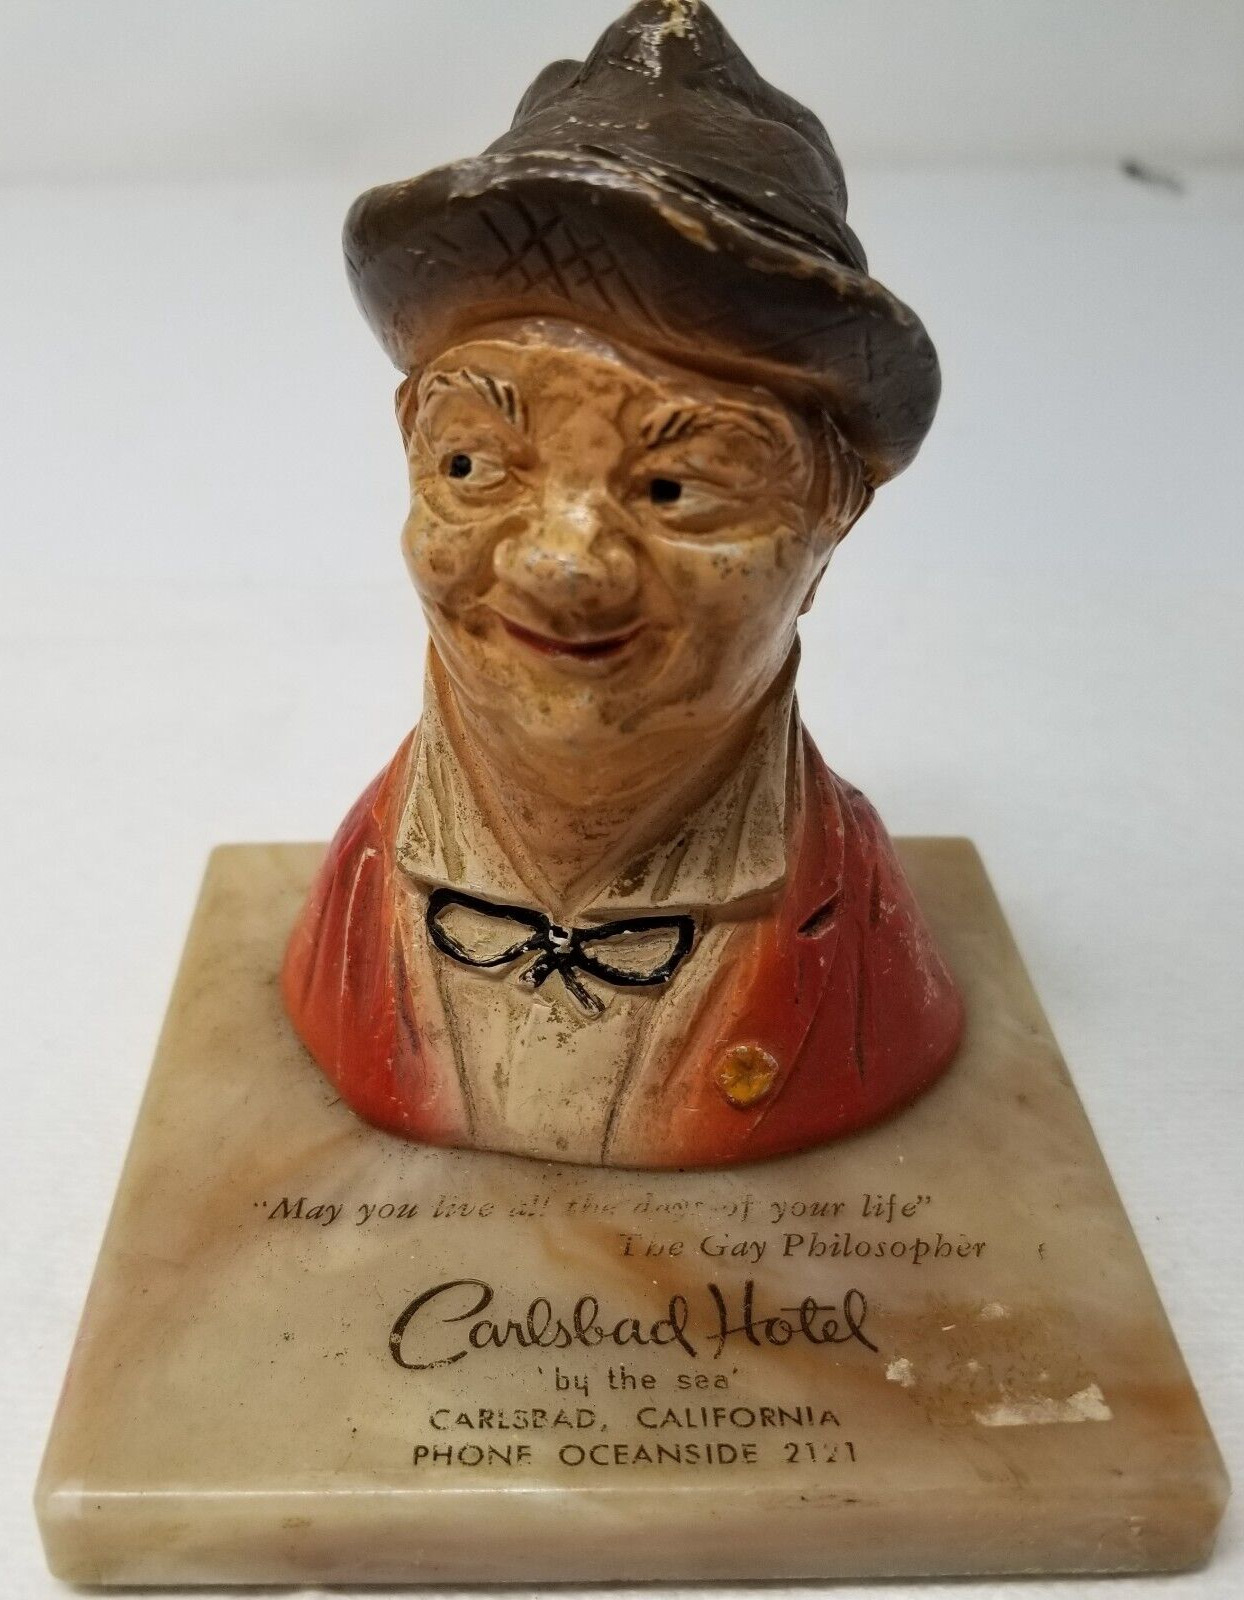 Henry Major The Gay Philosopher Figurine Carlsbad Hotel by the Sea Vintage